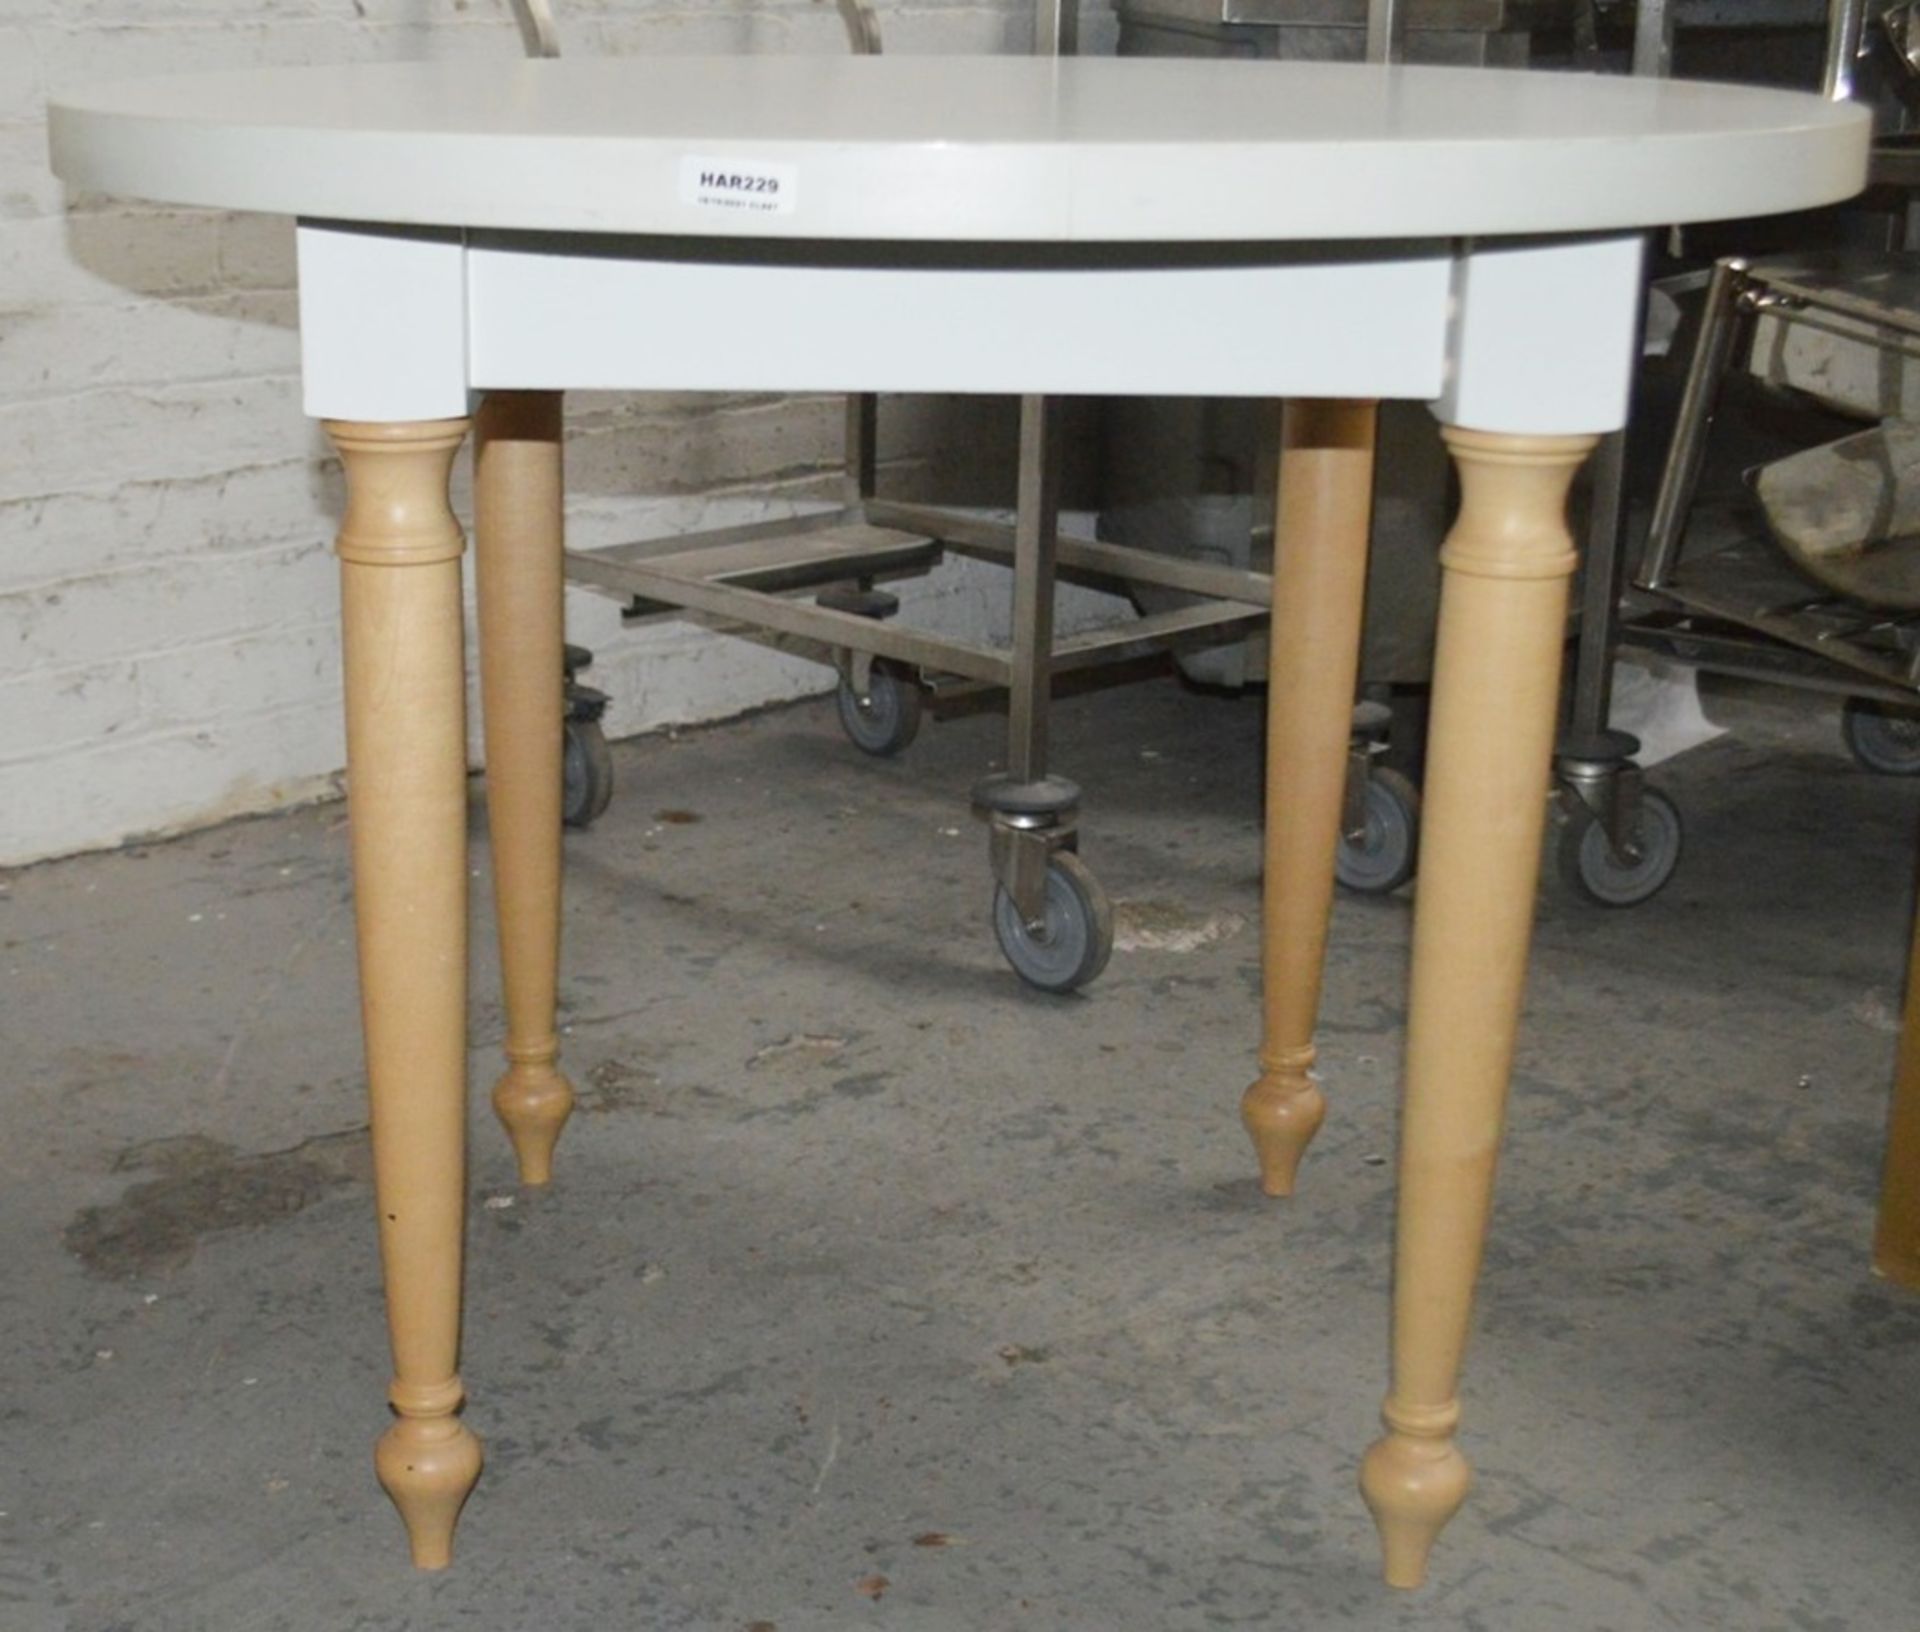 2 x Round Event Tables - Each Features Attractive Turned Legs In Beech Wood And A White Top - Image 5 of 6